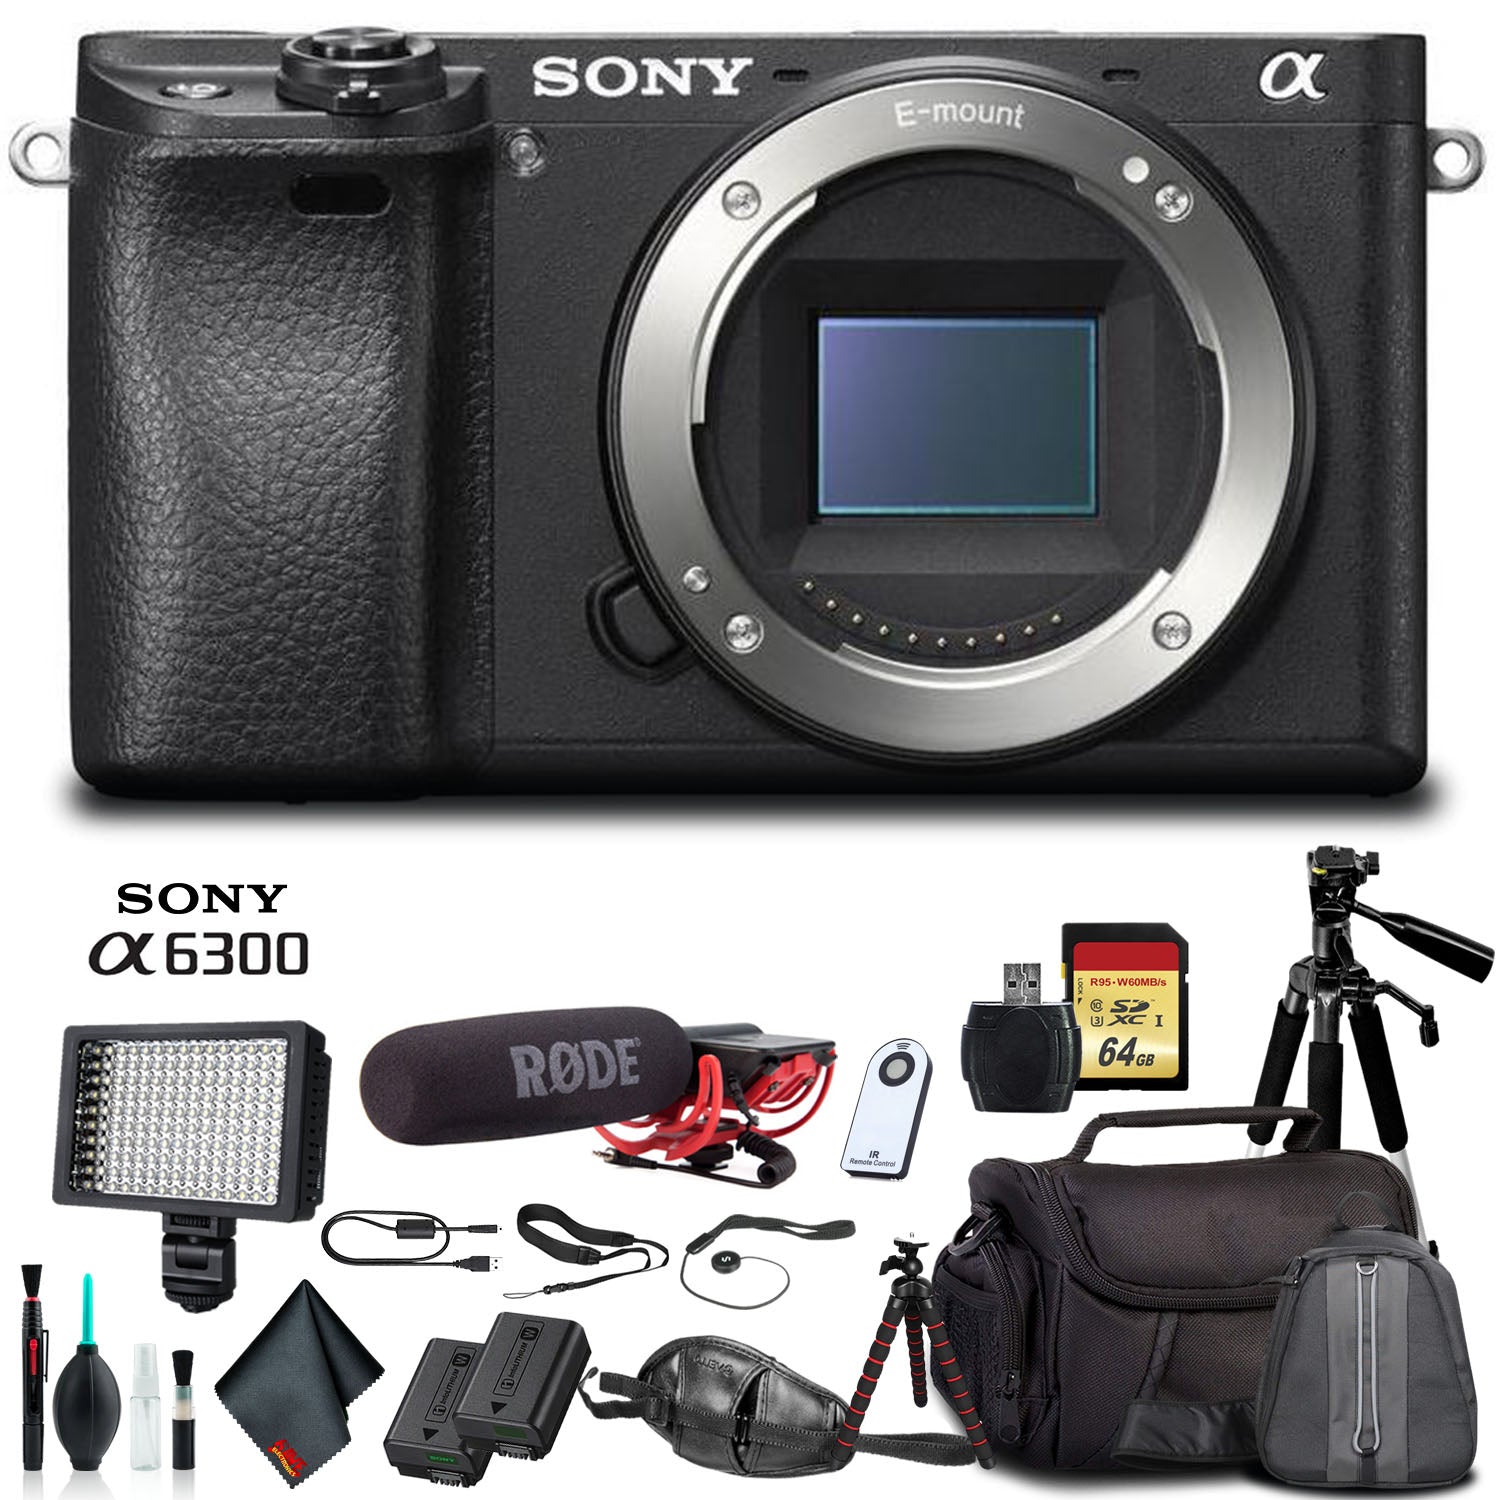 Sony Alpha a6300 Mirrorless Camera Black ILCE6300/B With Soft Bag, Tripod, Additional Battery, Rode Mic, LED Light, 64GB Memory Card, Sling Soft Bag, Card Reader , Plus Essential Accessories